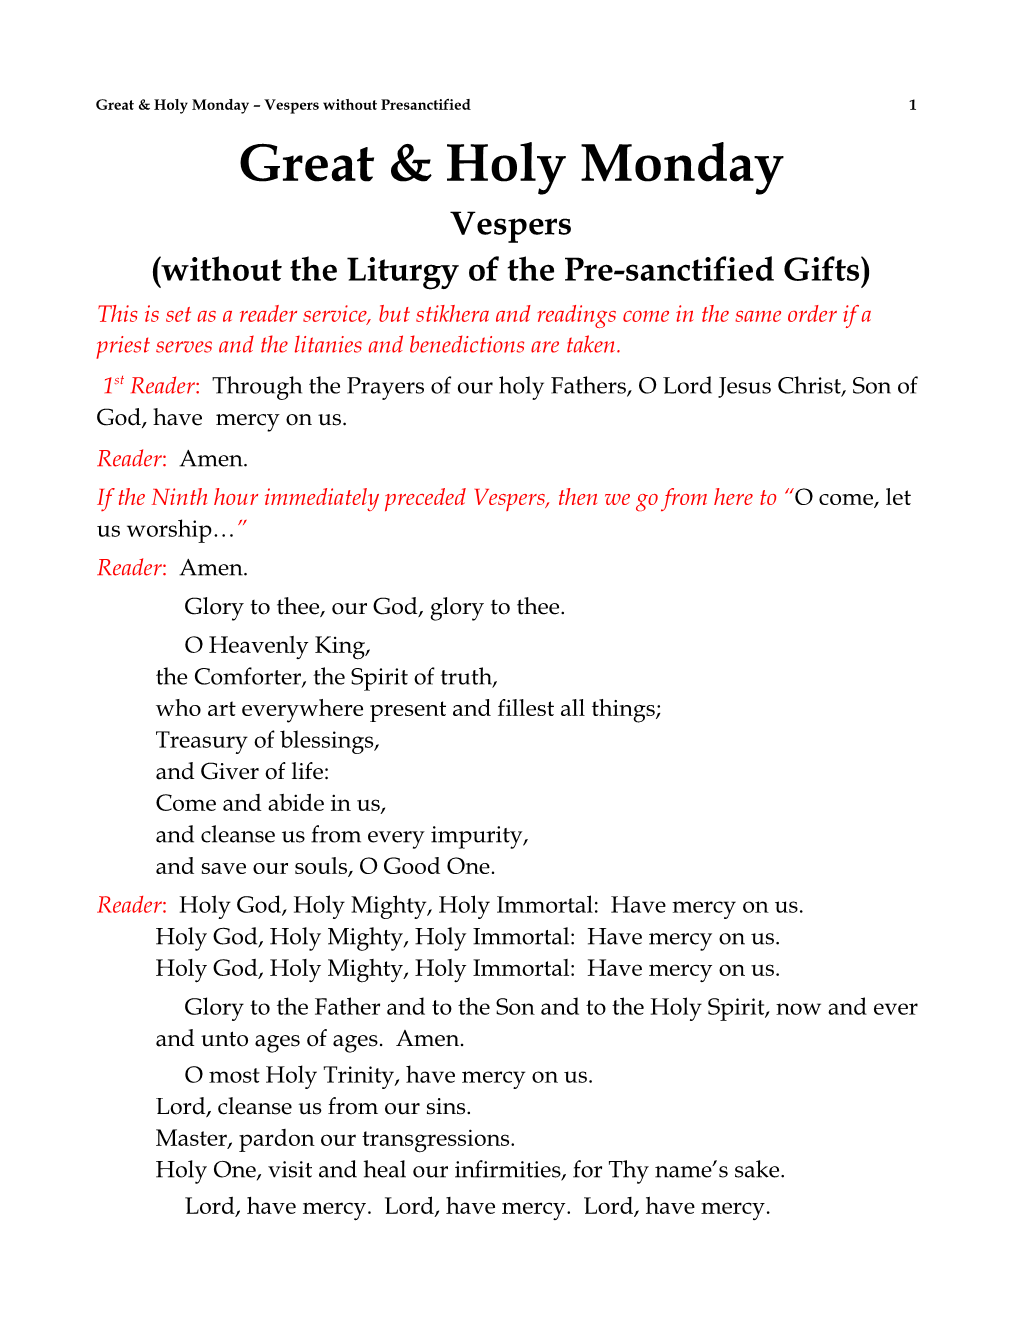 Great and Holy Monday Vespers